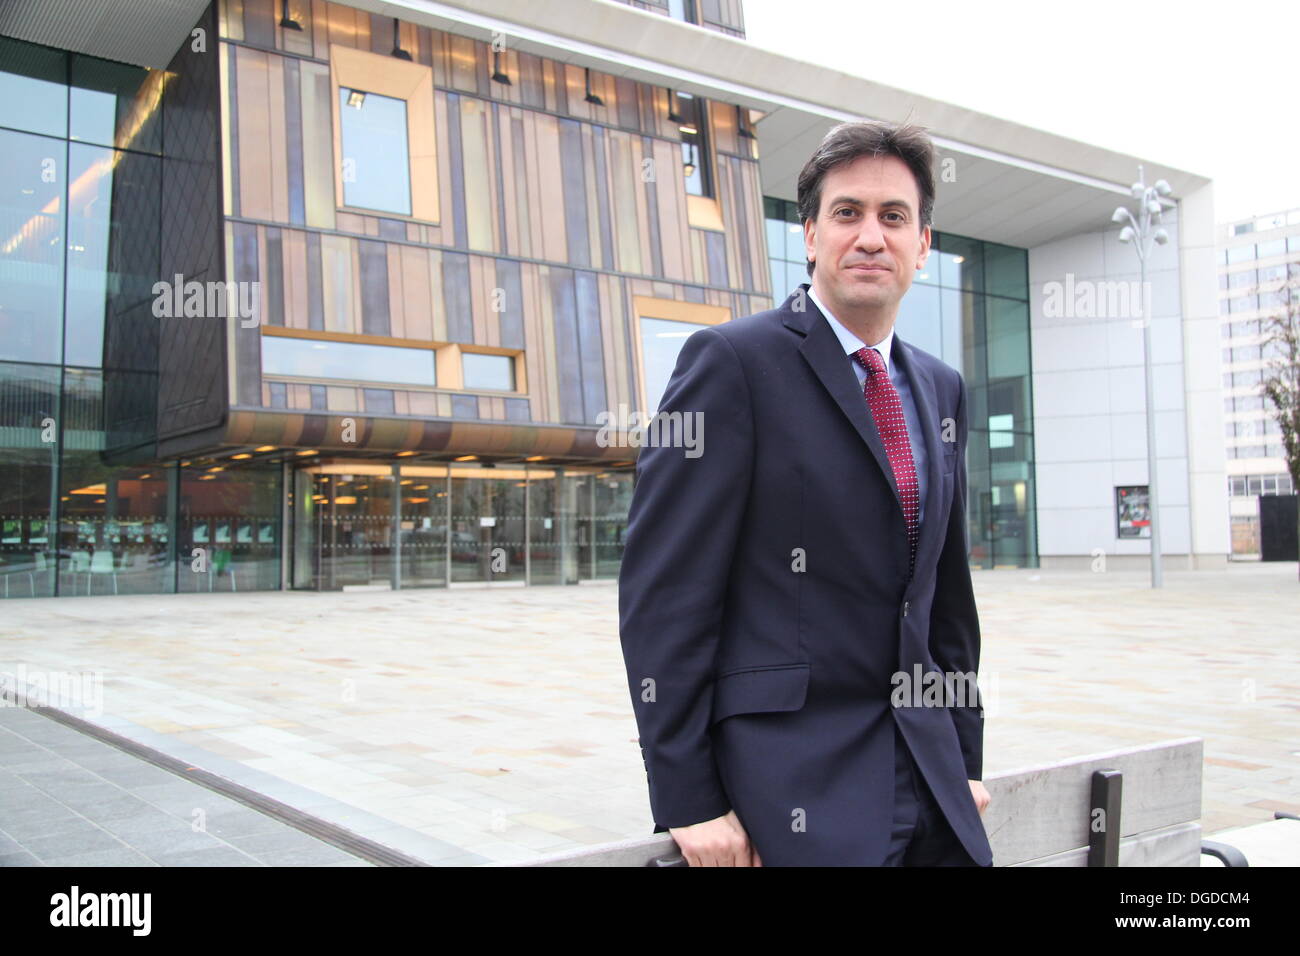 Labour Party leader & MP for Doncaster North, Ed Miliband visits Cast, Doncaster's performance venue, South Yorkshire, UK Stock Photo